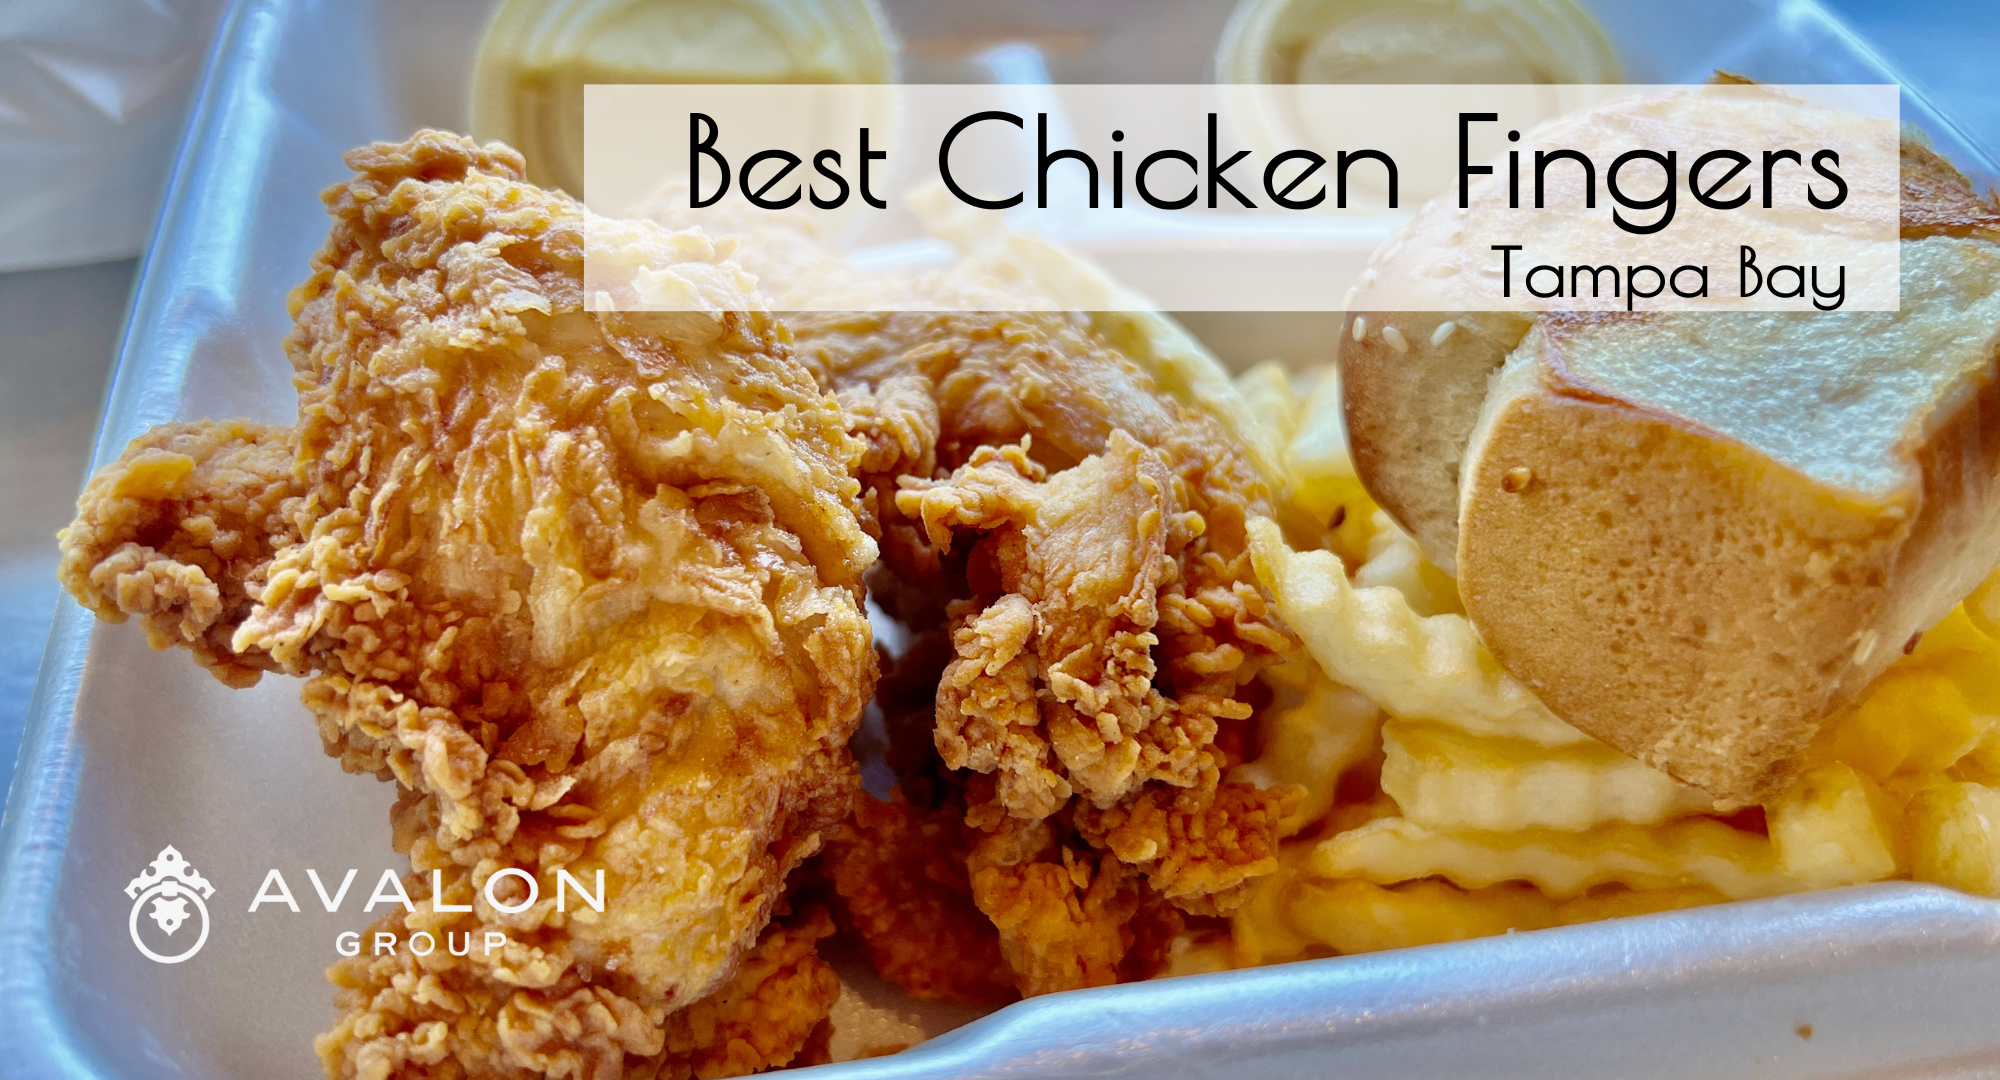 Up close picture of perfectly golden brown chicken fingers, fries, bread and honey mustard sauce on the title picture saying "Best Chicken Fingers Tampa Bay.